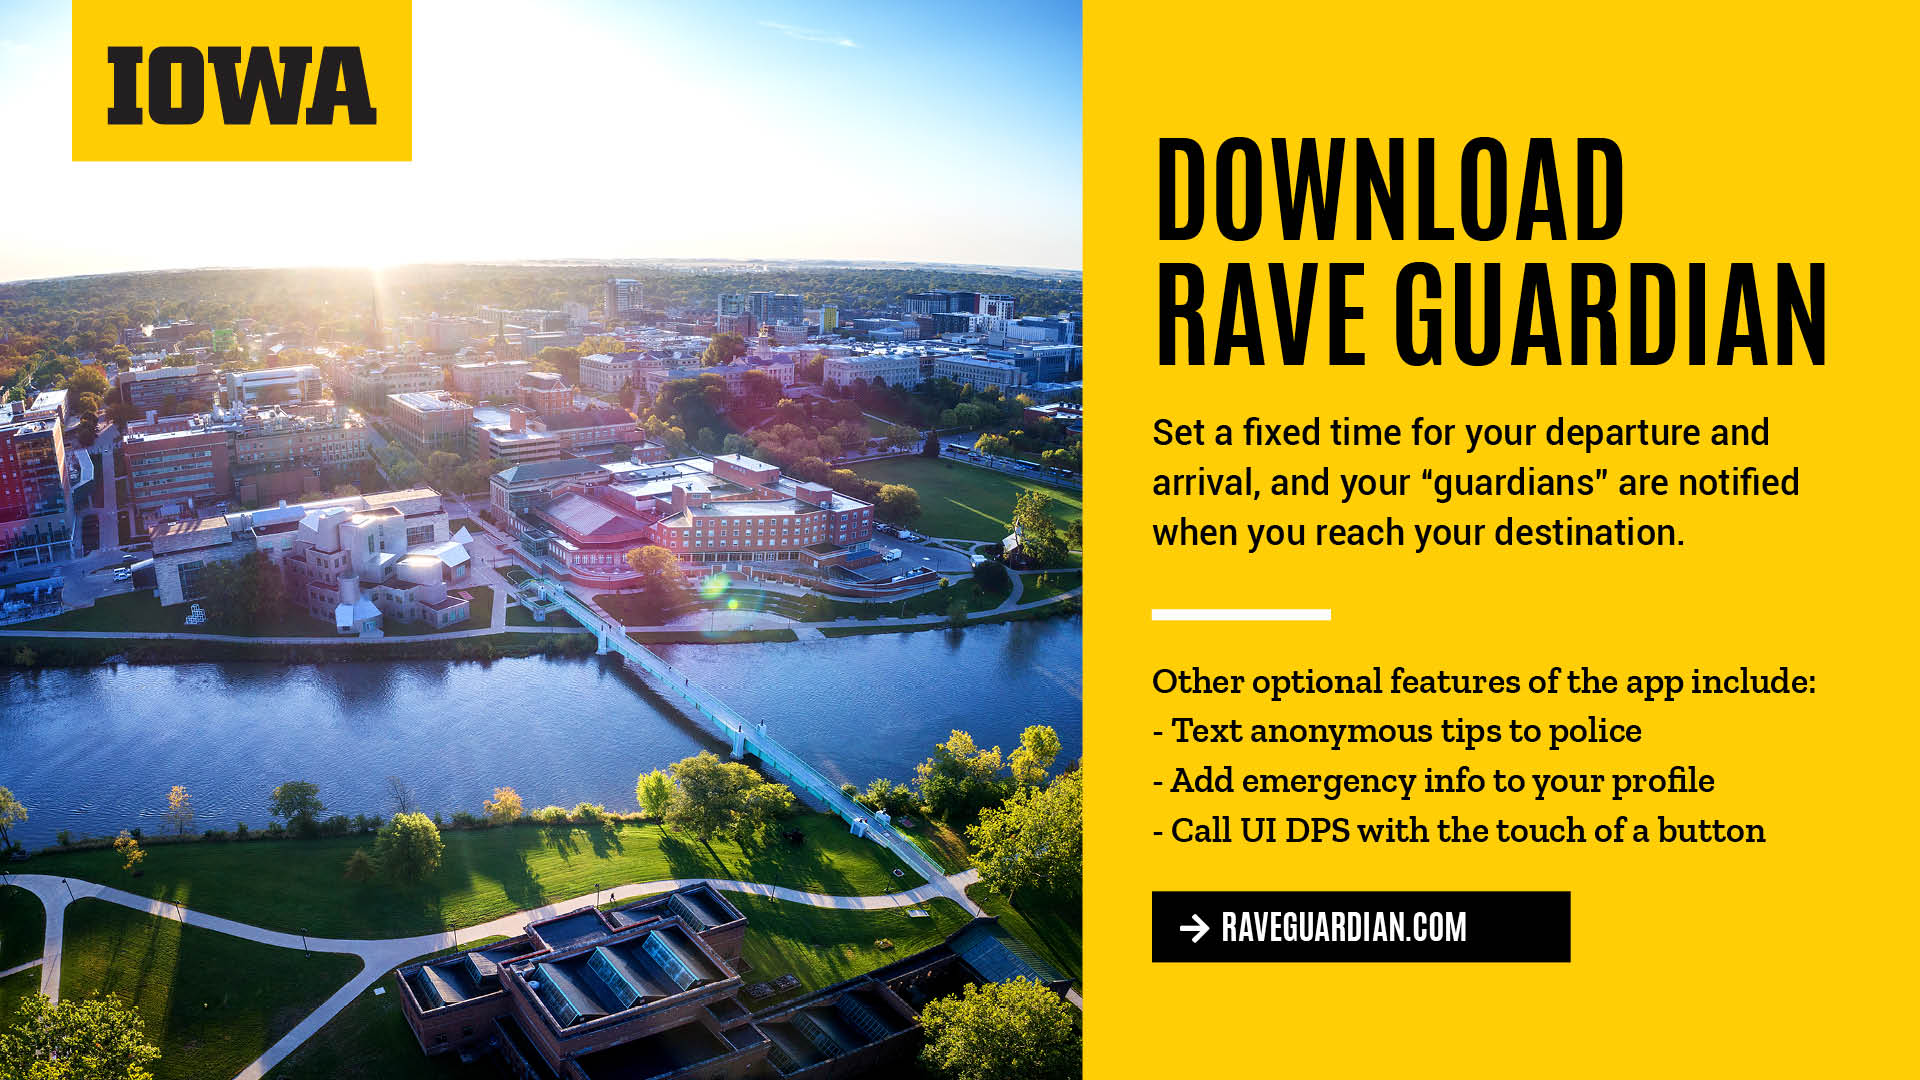 Black text on gold background says: "Download Rave Guardian; Set a fixed time for your departure and arrival, and your "guardians" are notified when you reach your destination.; Other optional features of the app include text anonymous tips to police; add emergency information to your profile; Call UI DPS with the touch of a button"